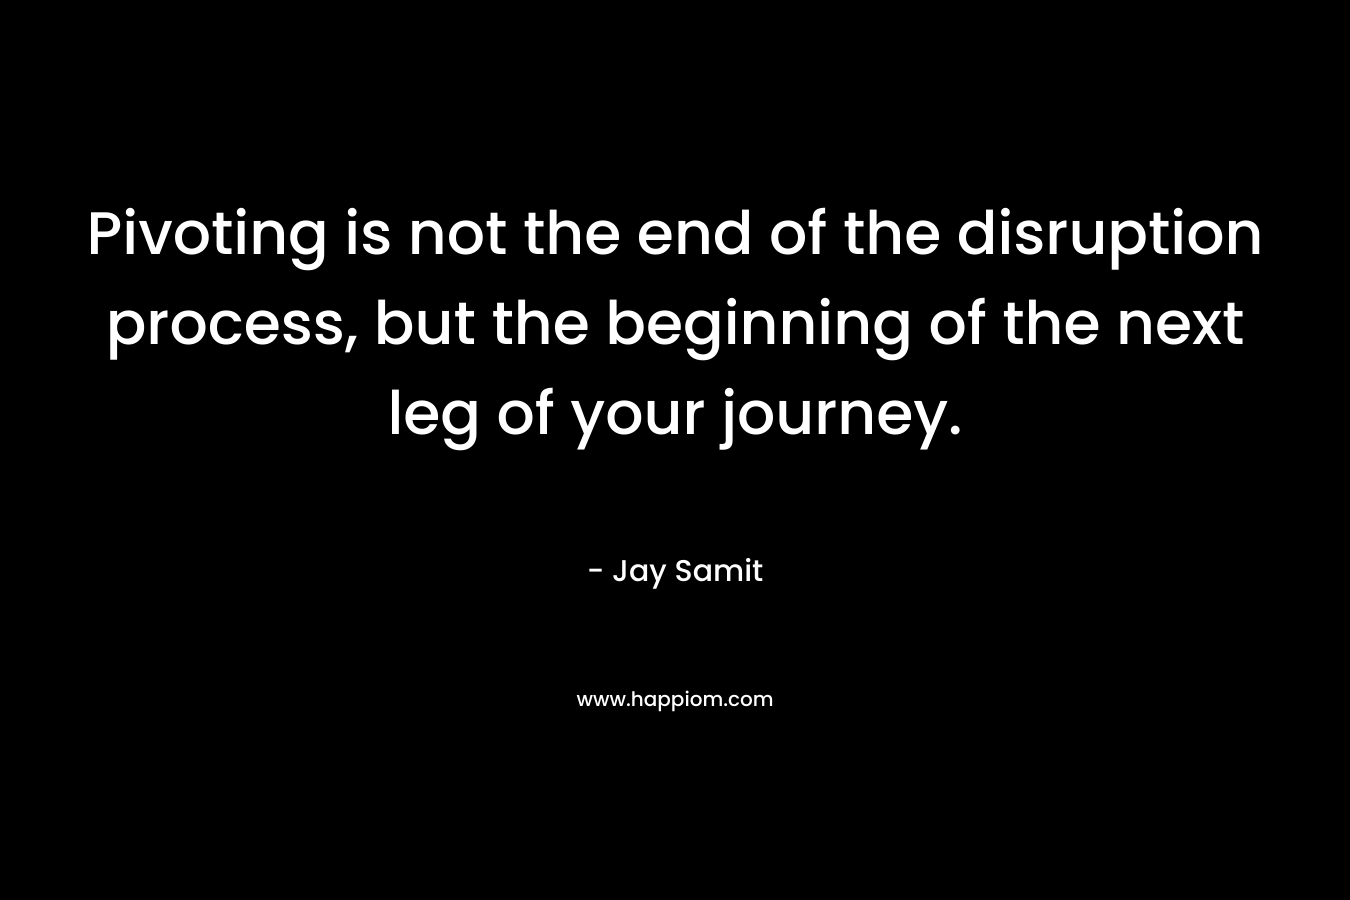 Pivoting is not the end of the disruption process, but the beginning of the next leg of your journey.